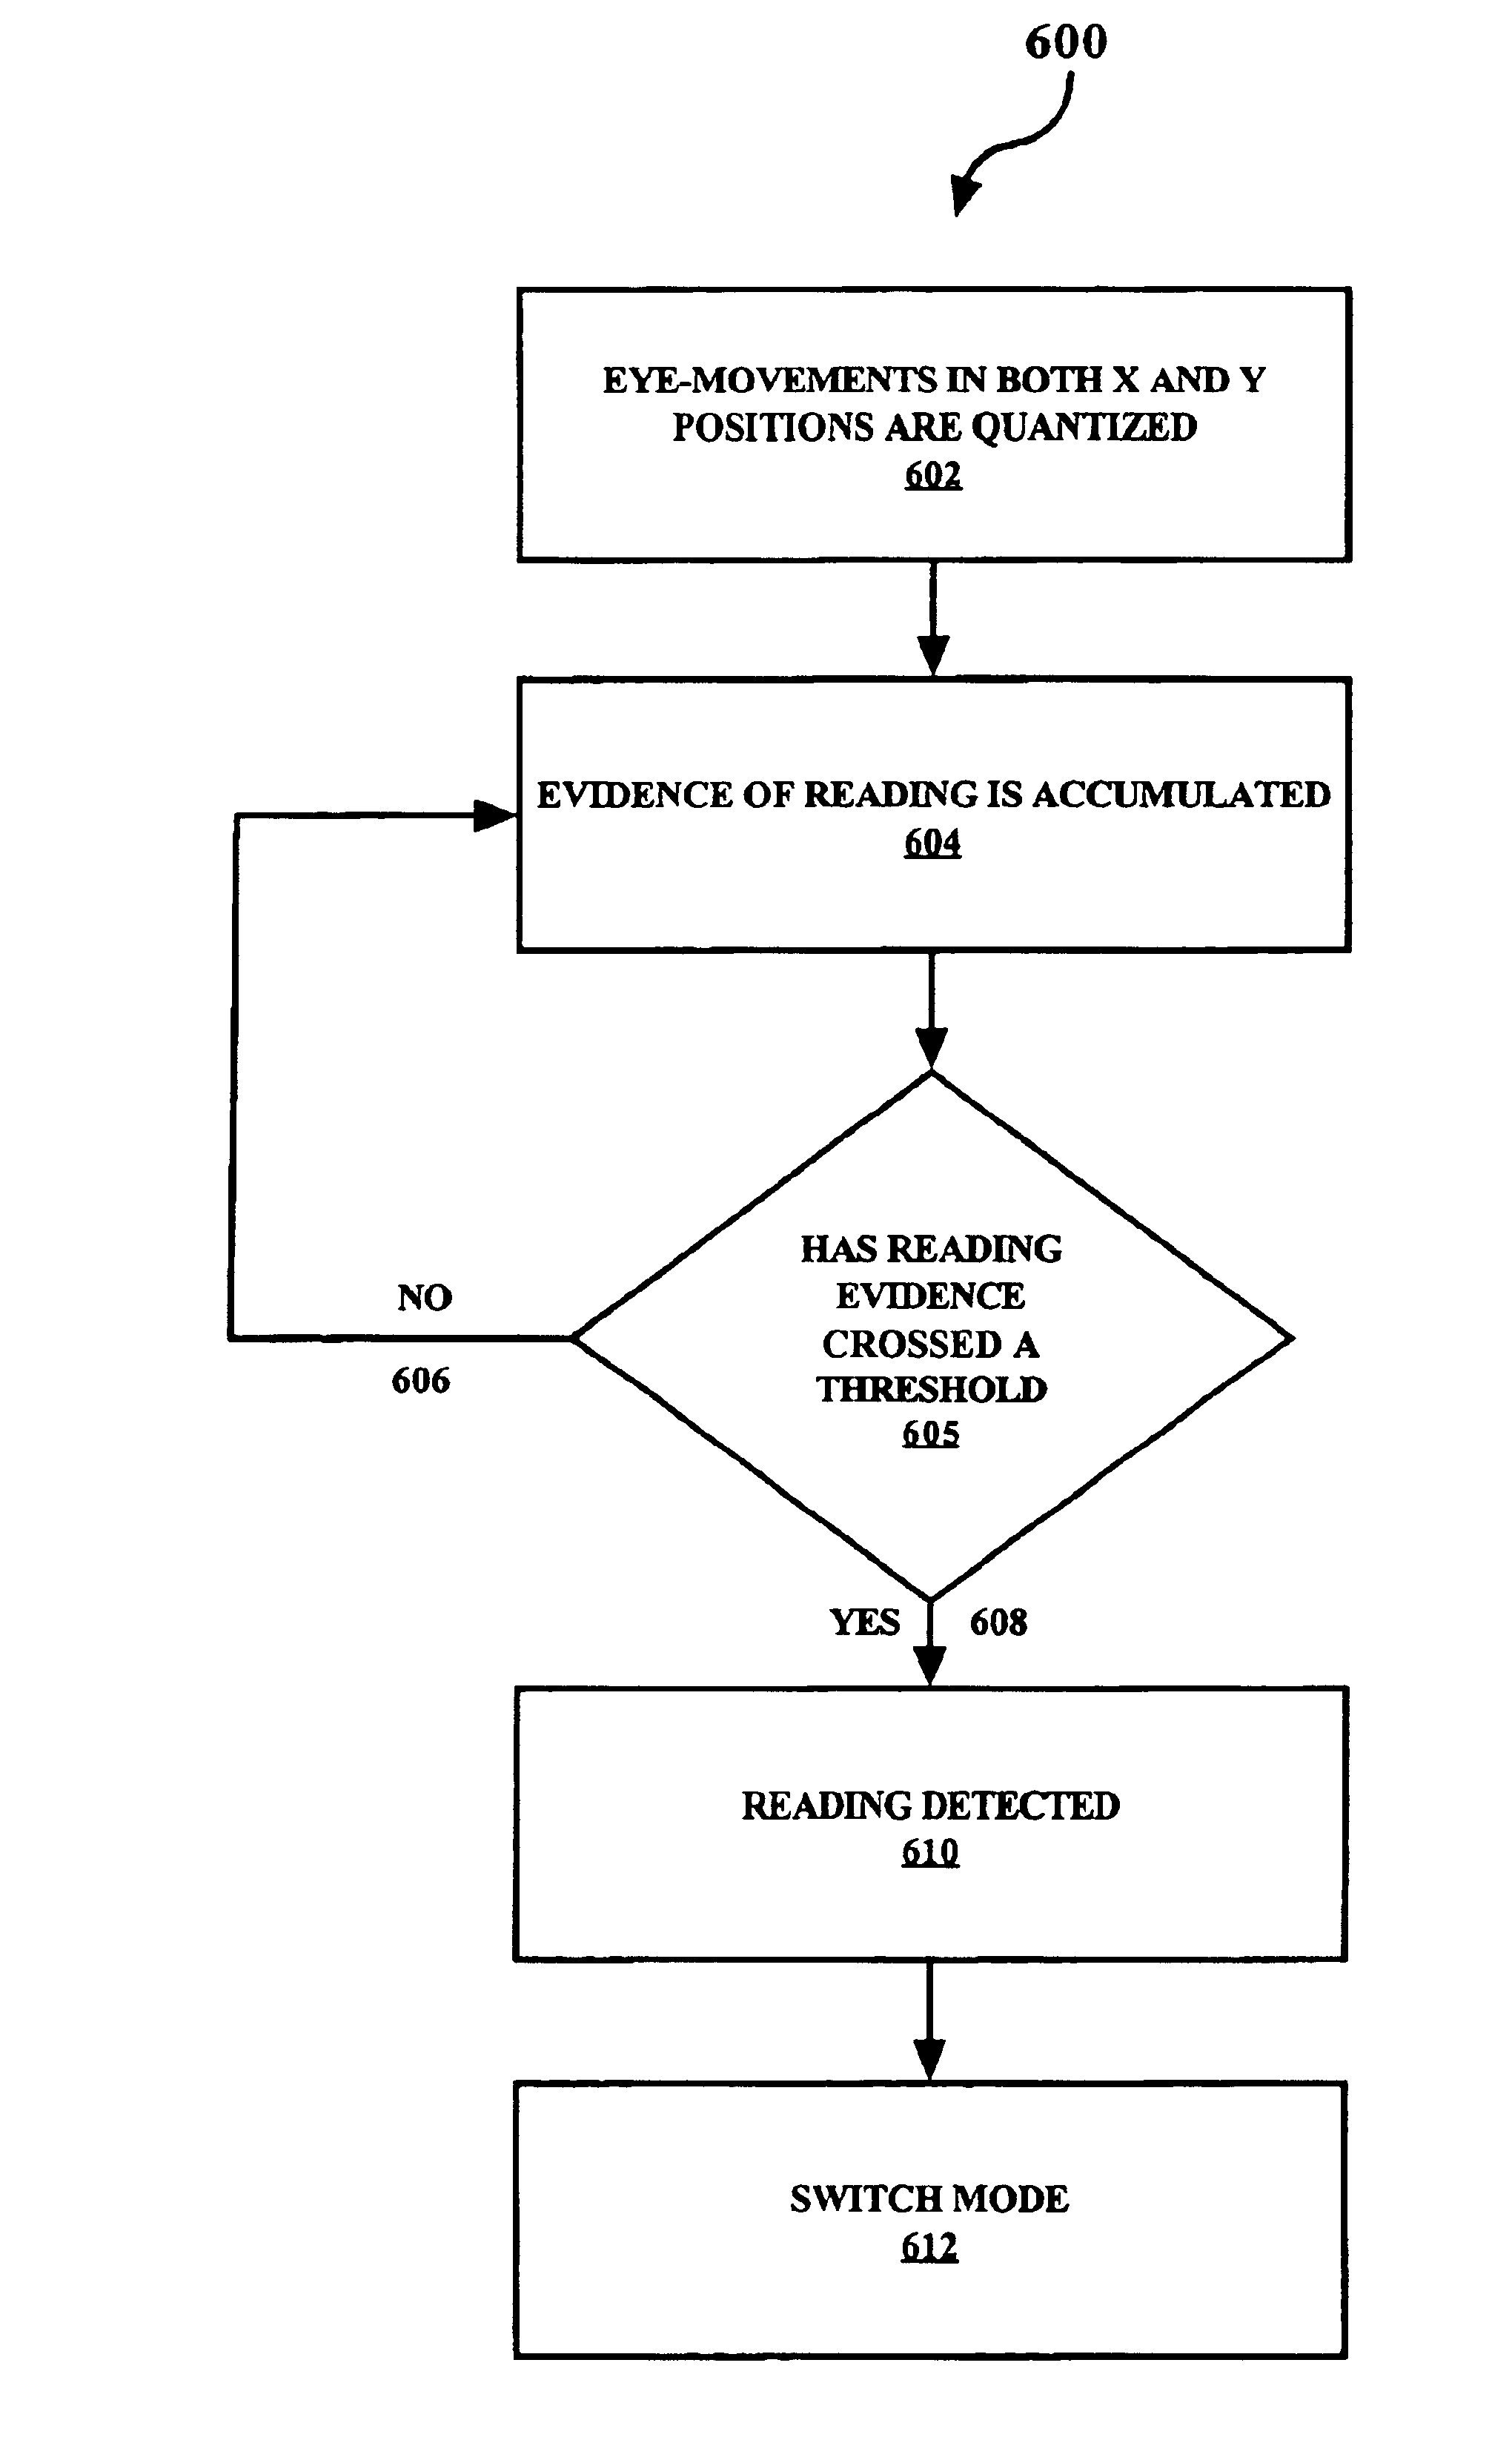 Method and system for the recognition of reading skimming and scanning from eye-gaze patterns